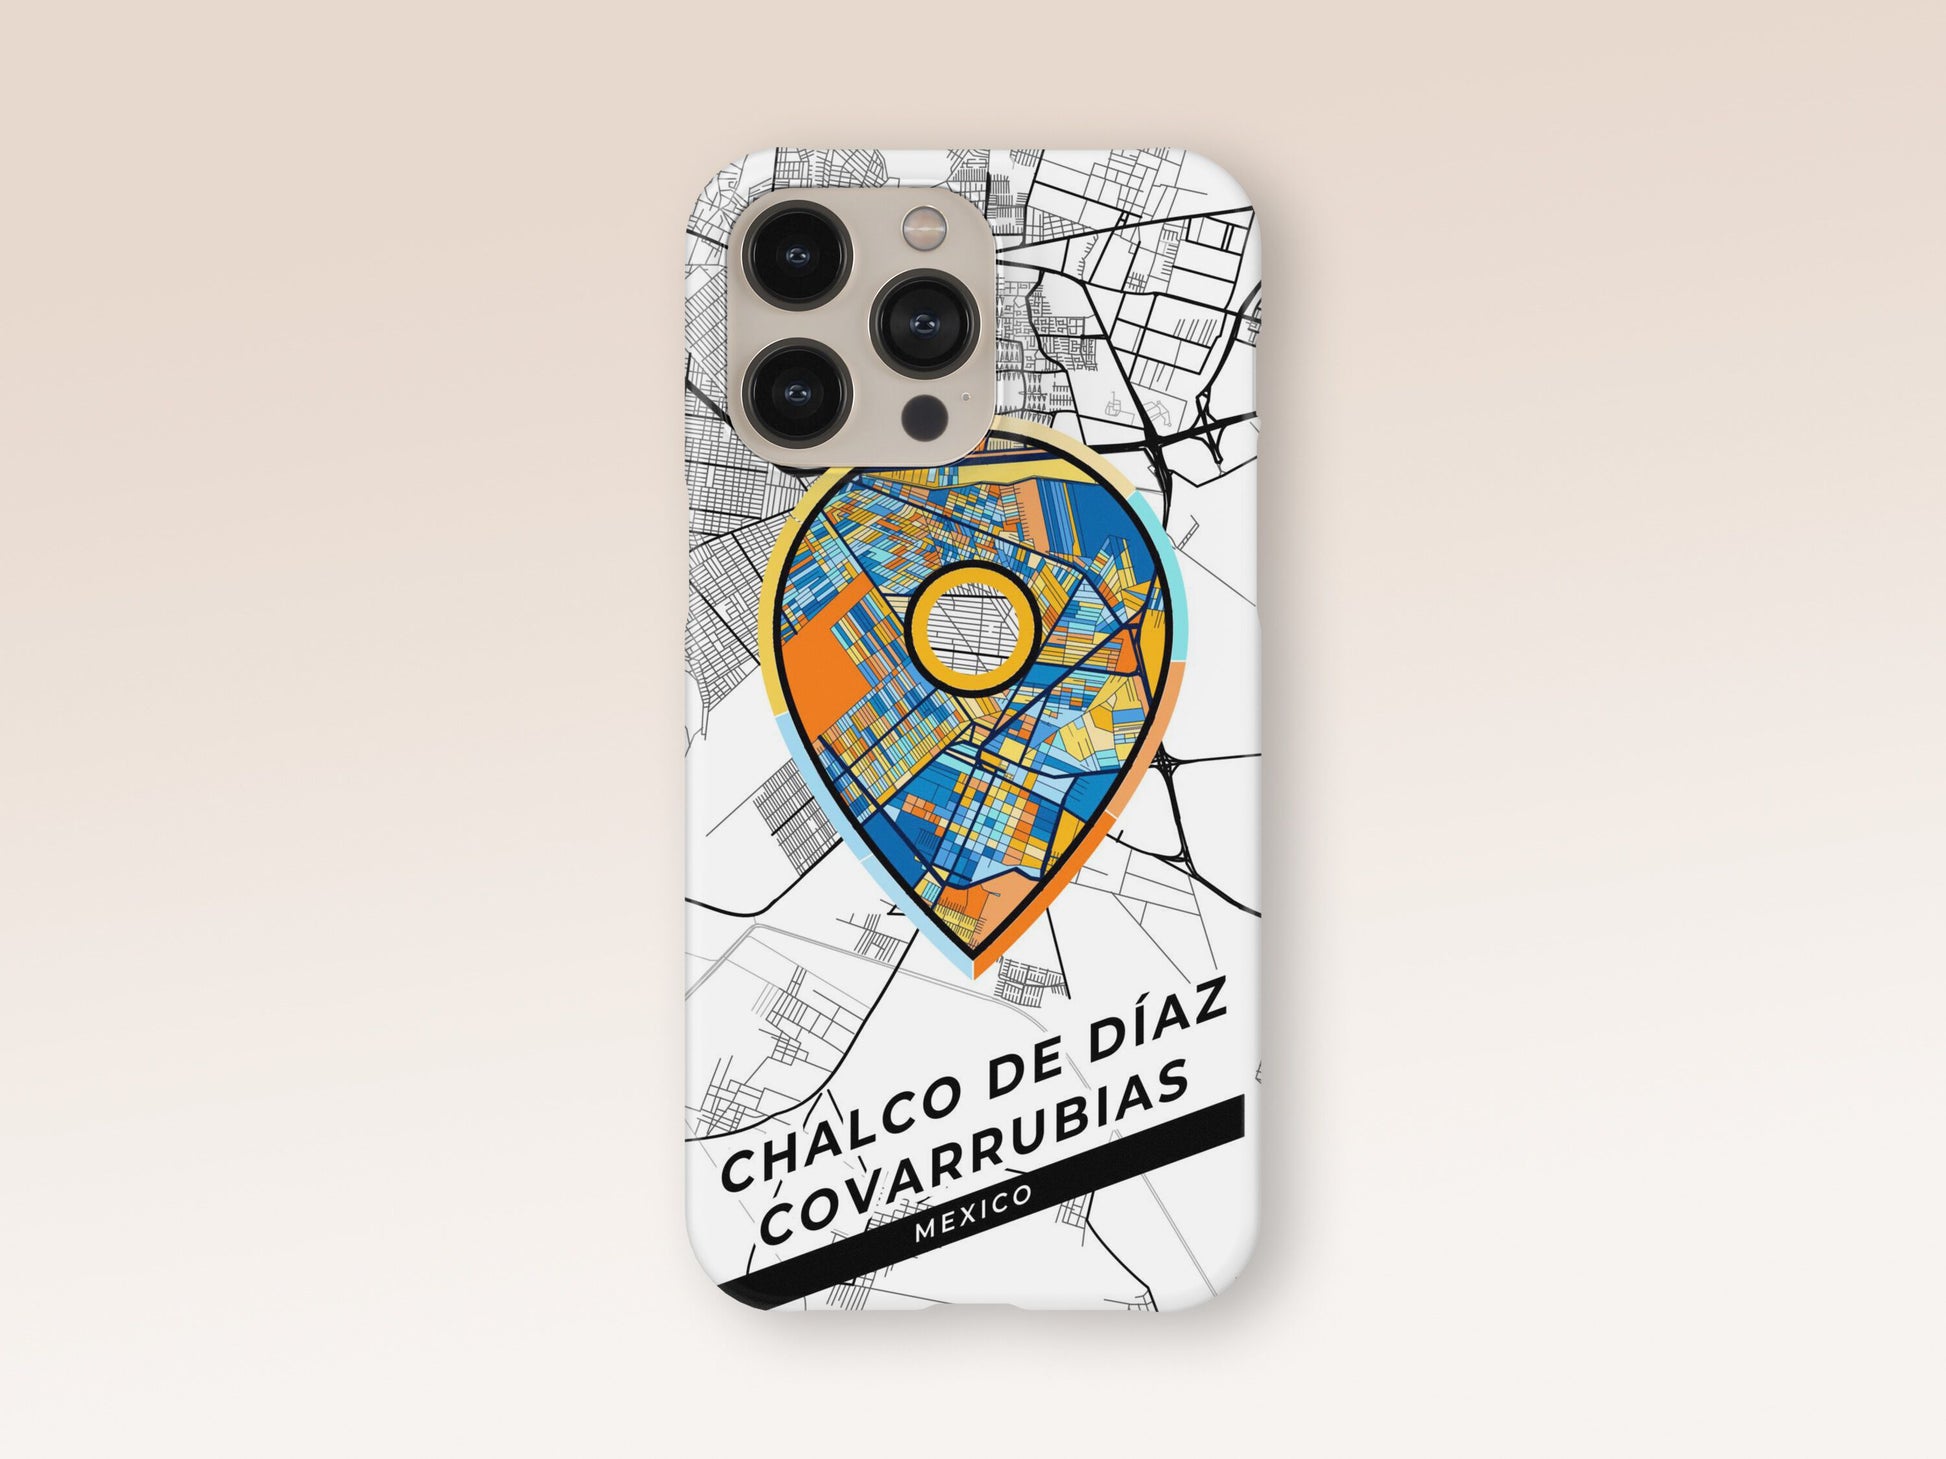 Chalco De Díaz Covarrubias Mexico slim phone case with colorful icon. Birthday, wedding or housewarming gift. Couple match cases. 1